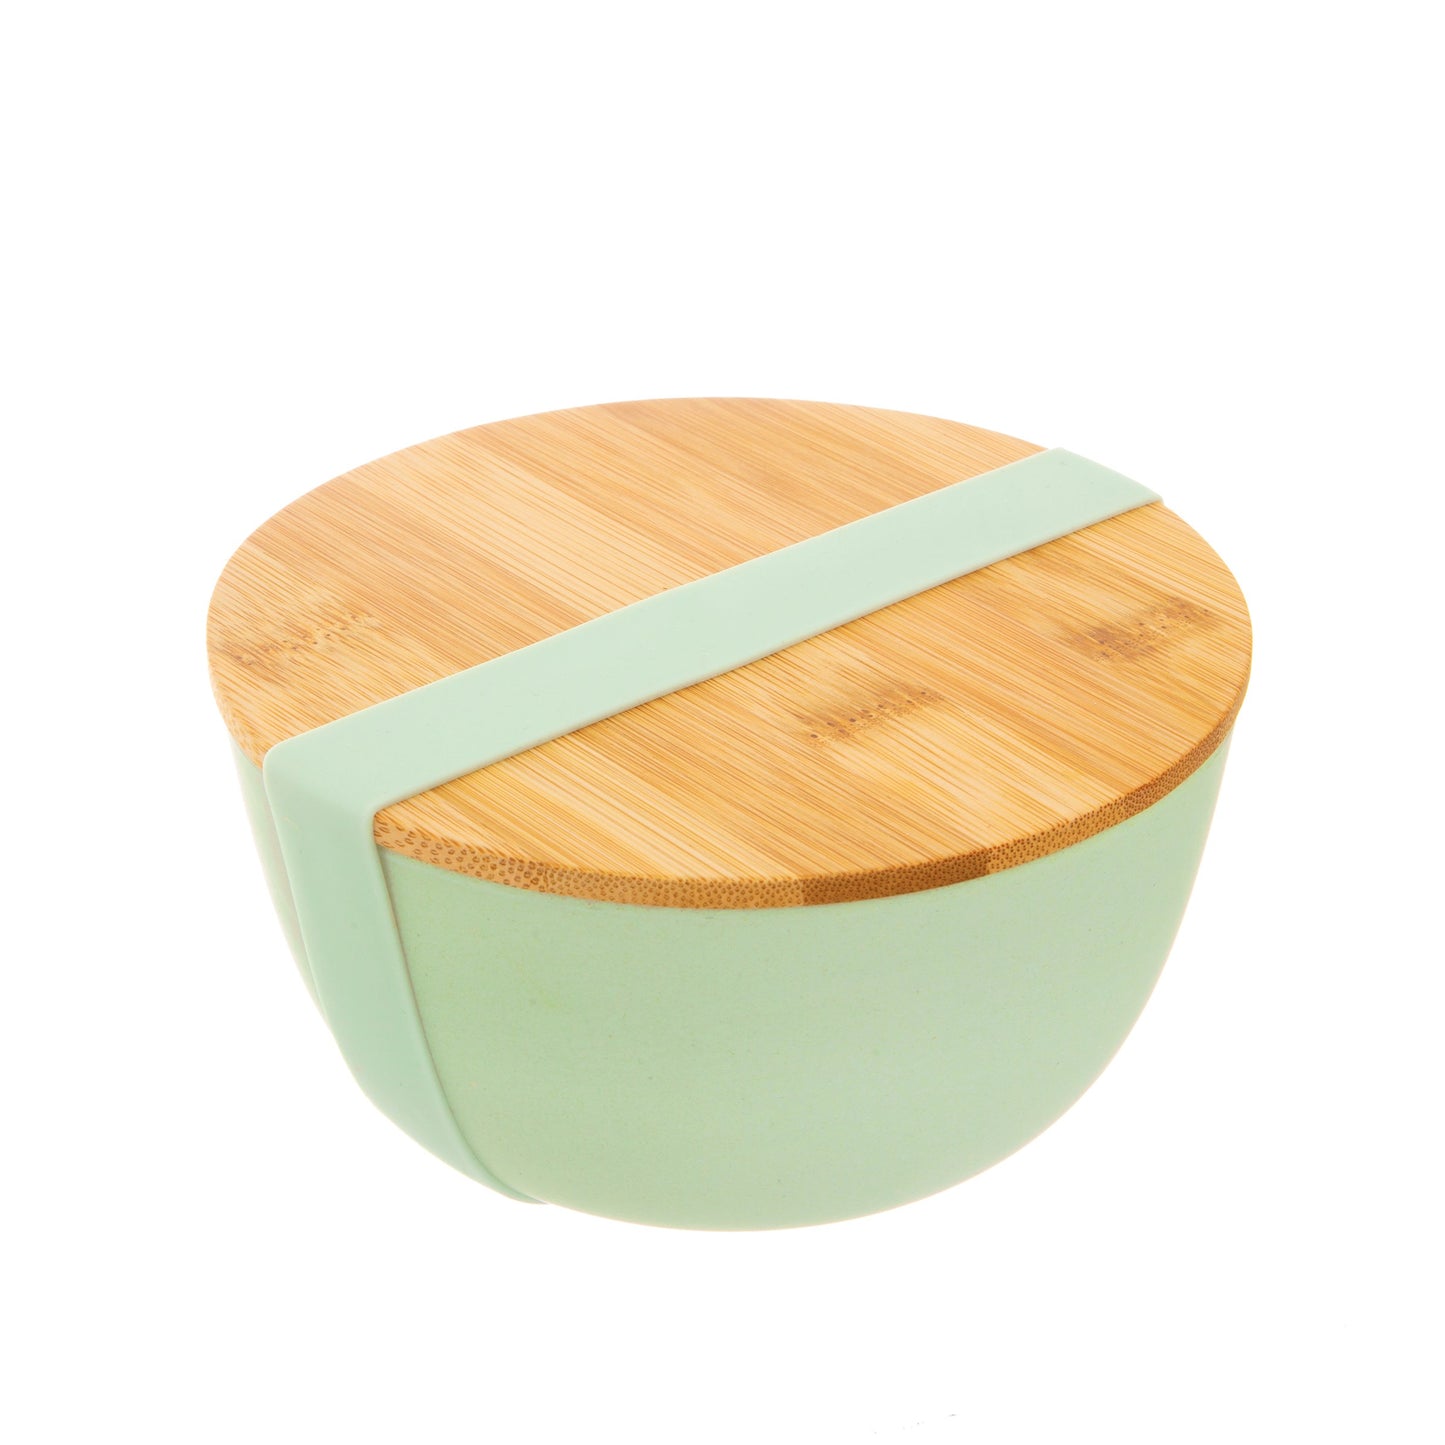 Mint Green Bamboo Bowl With Lid from Home and Bay